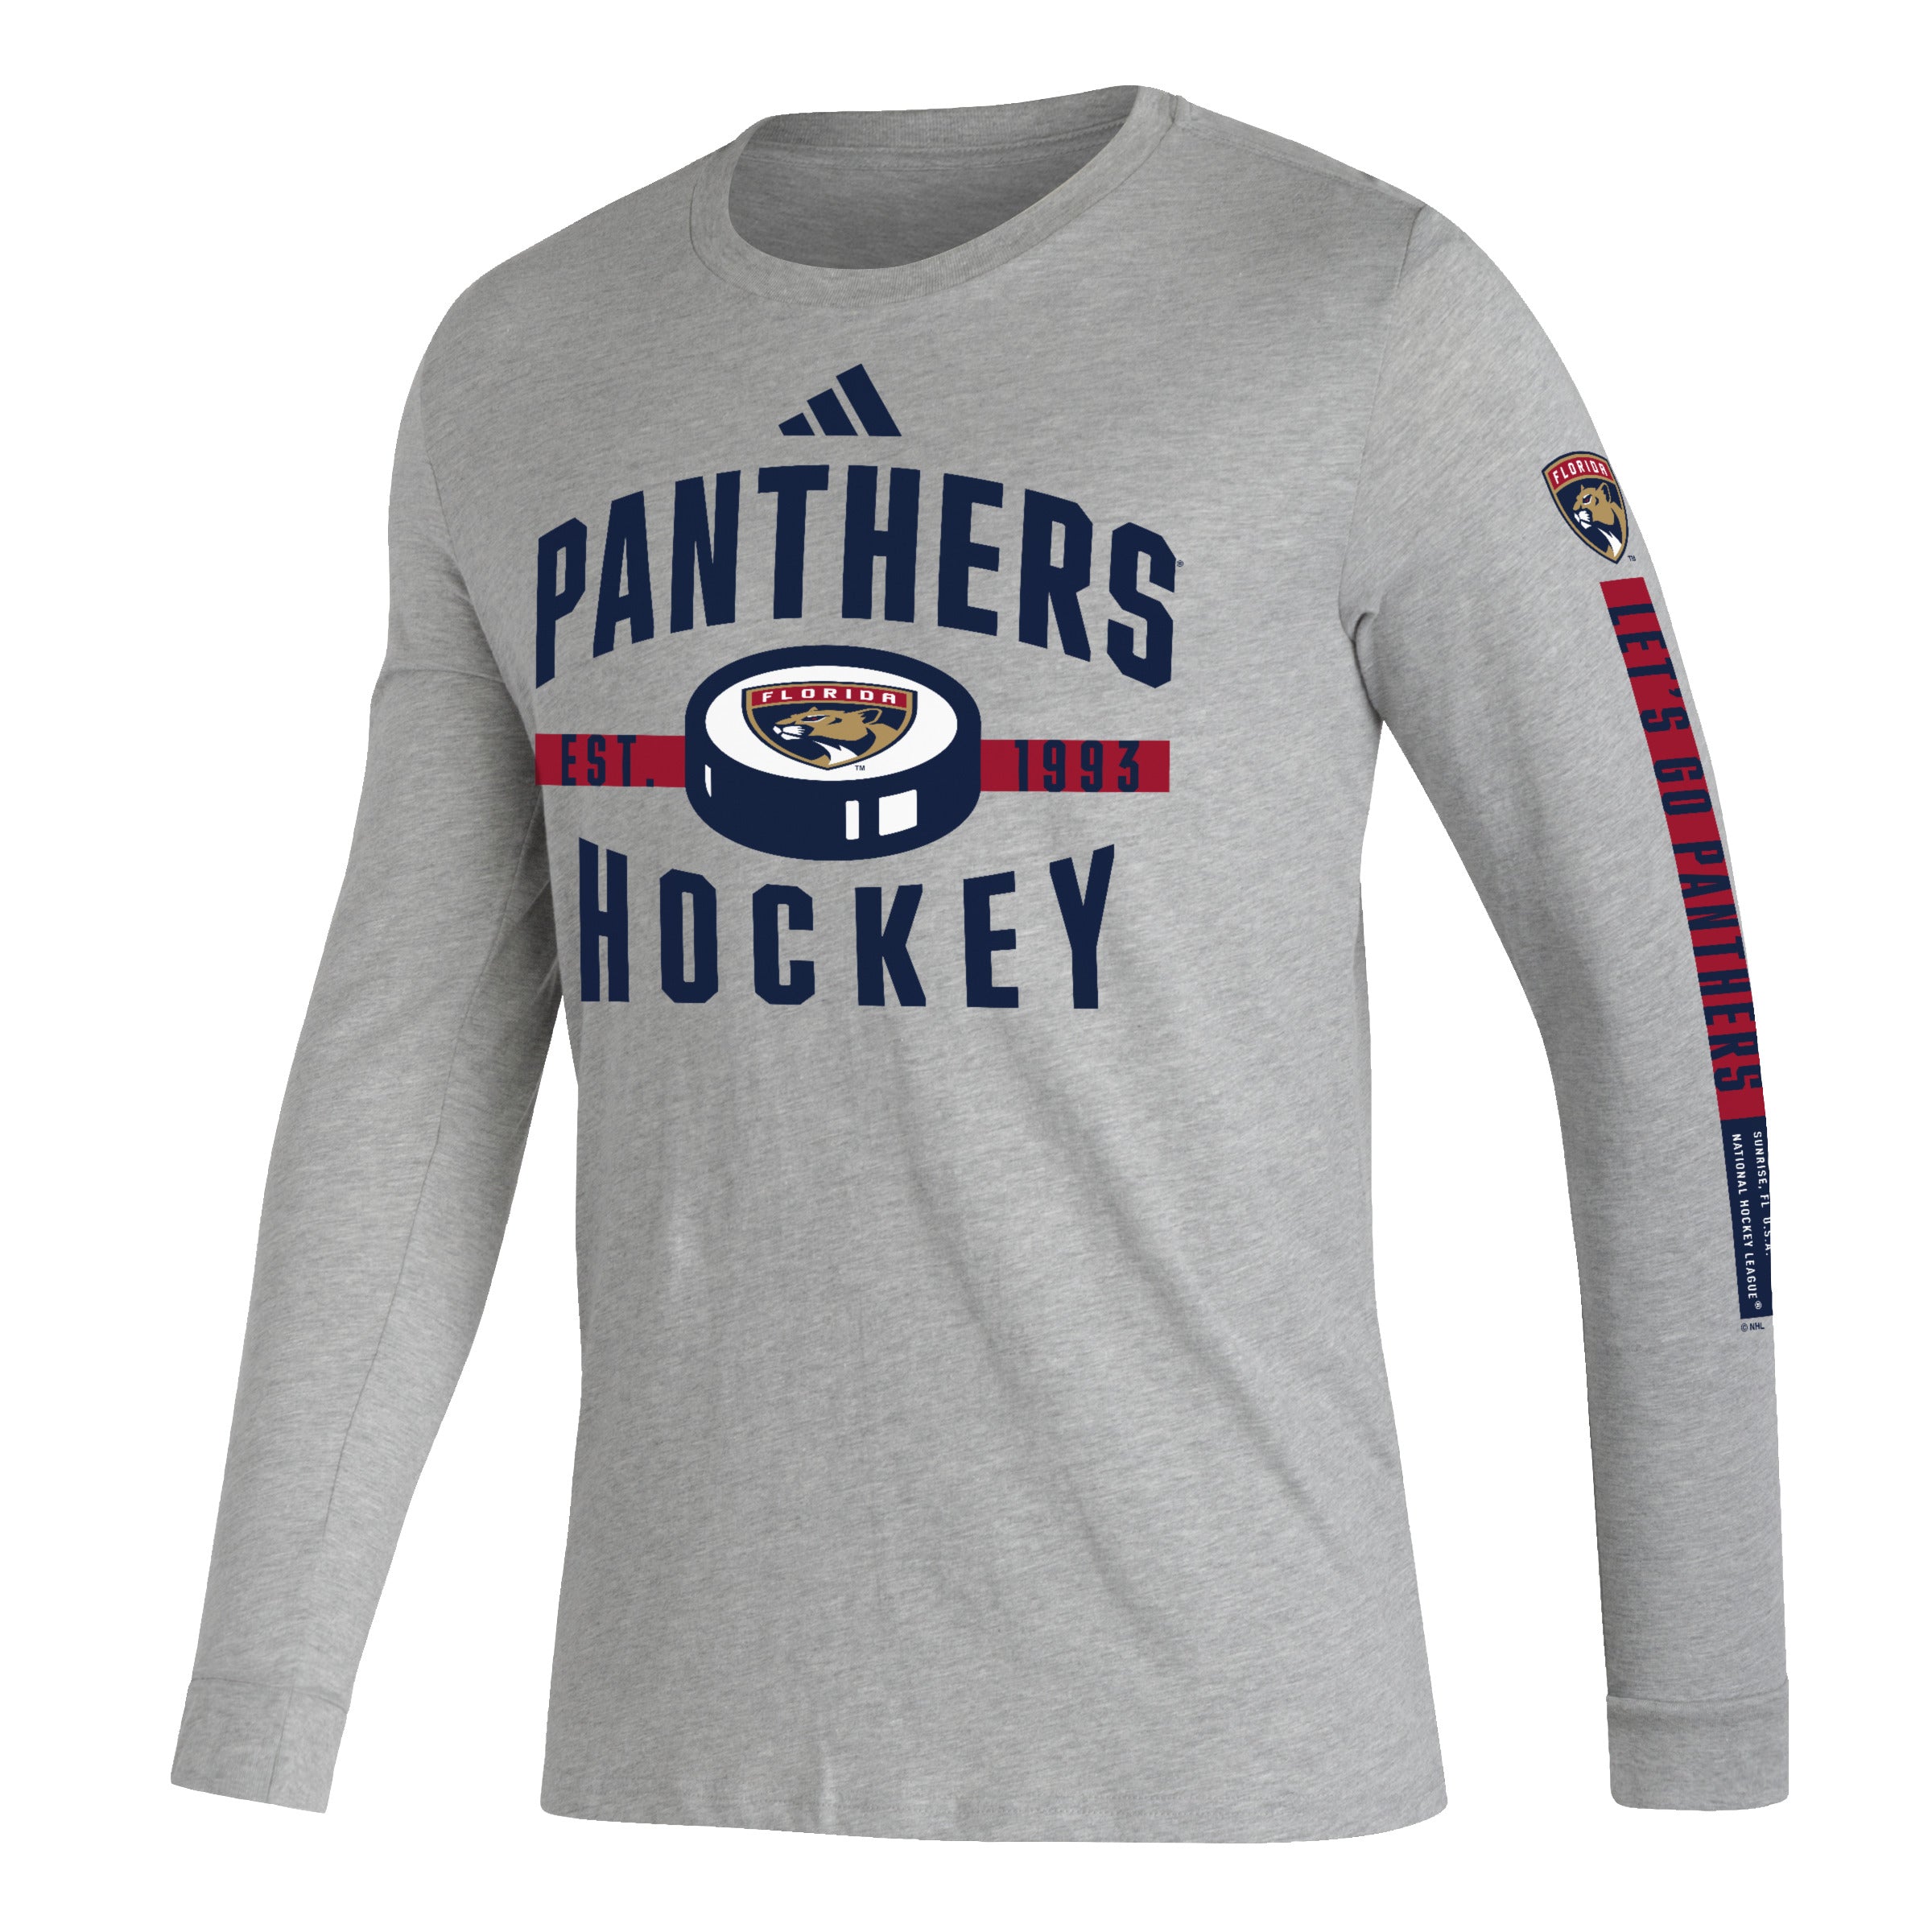 Men's Florida Panthers Gear & Hockey Gifts, Men's Panthers Apparel, Guys'  Clothes